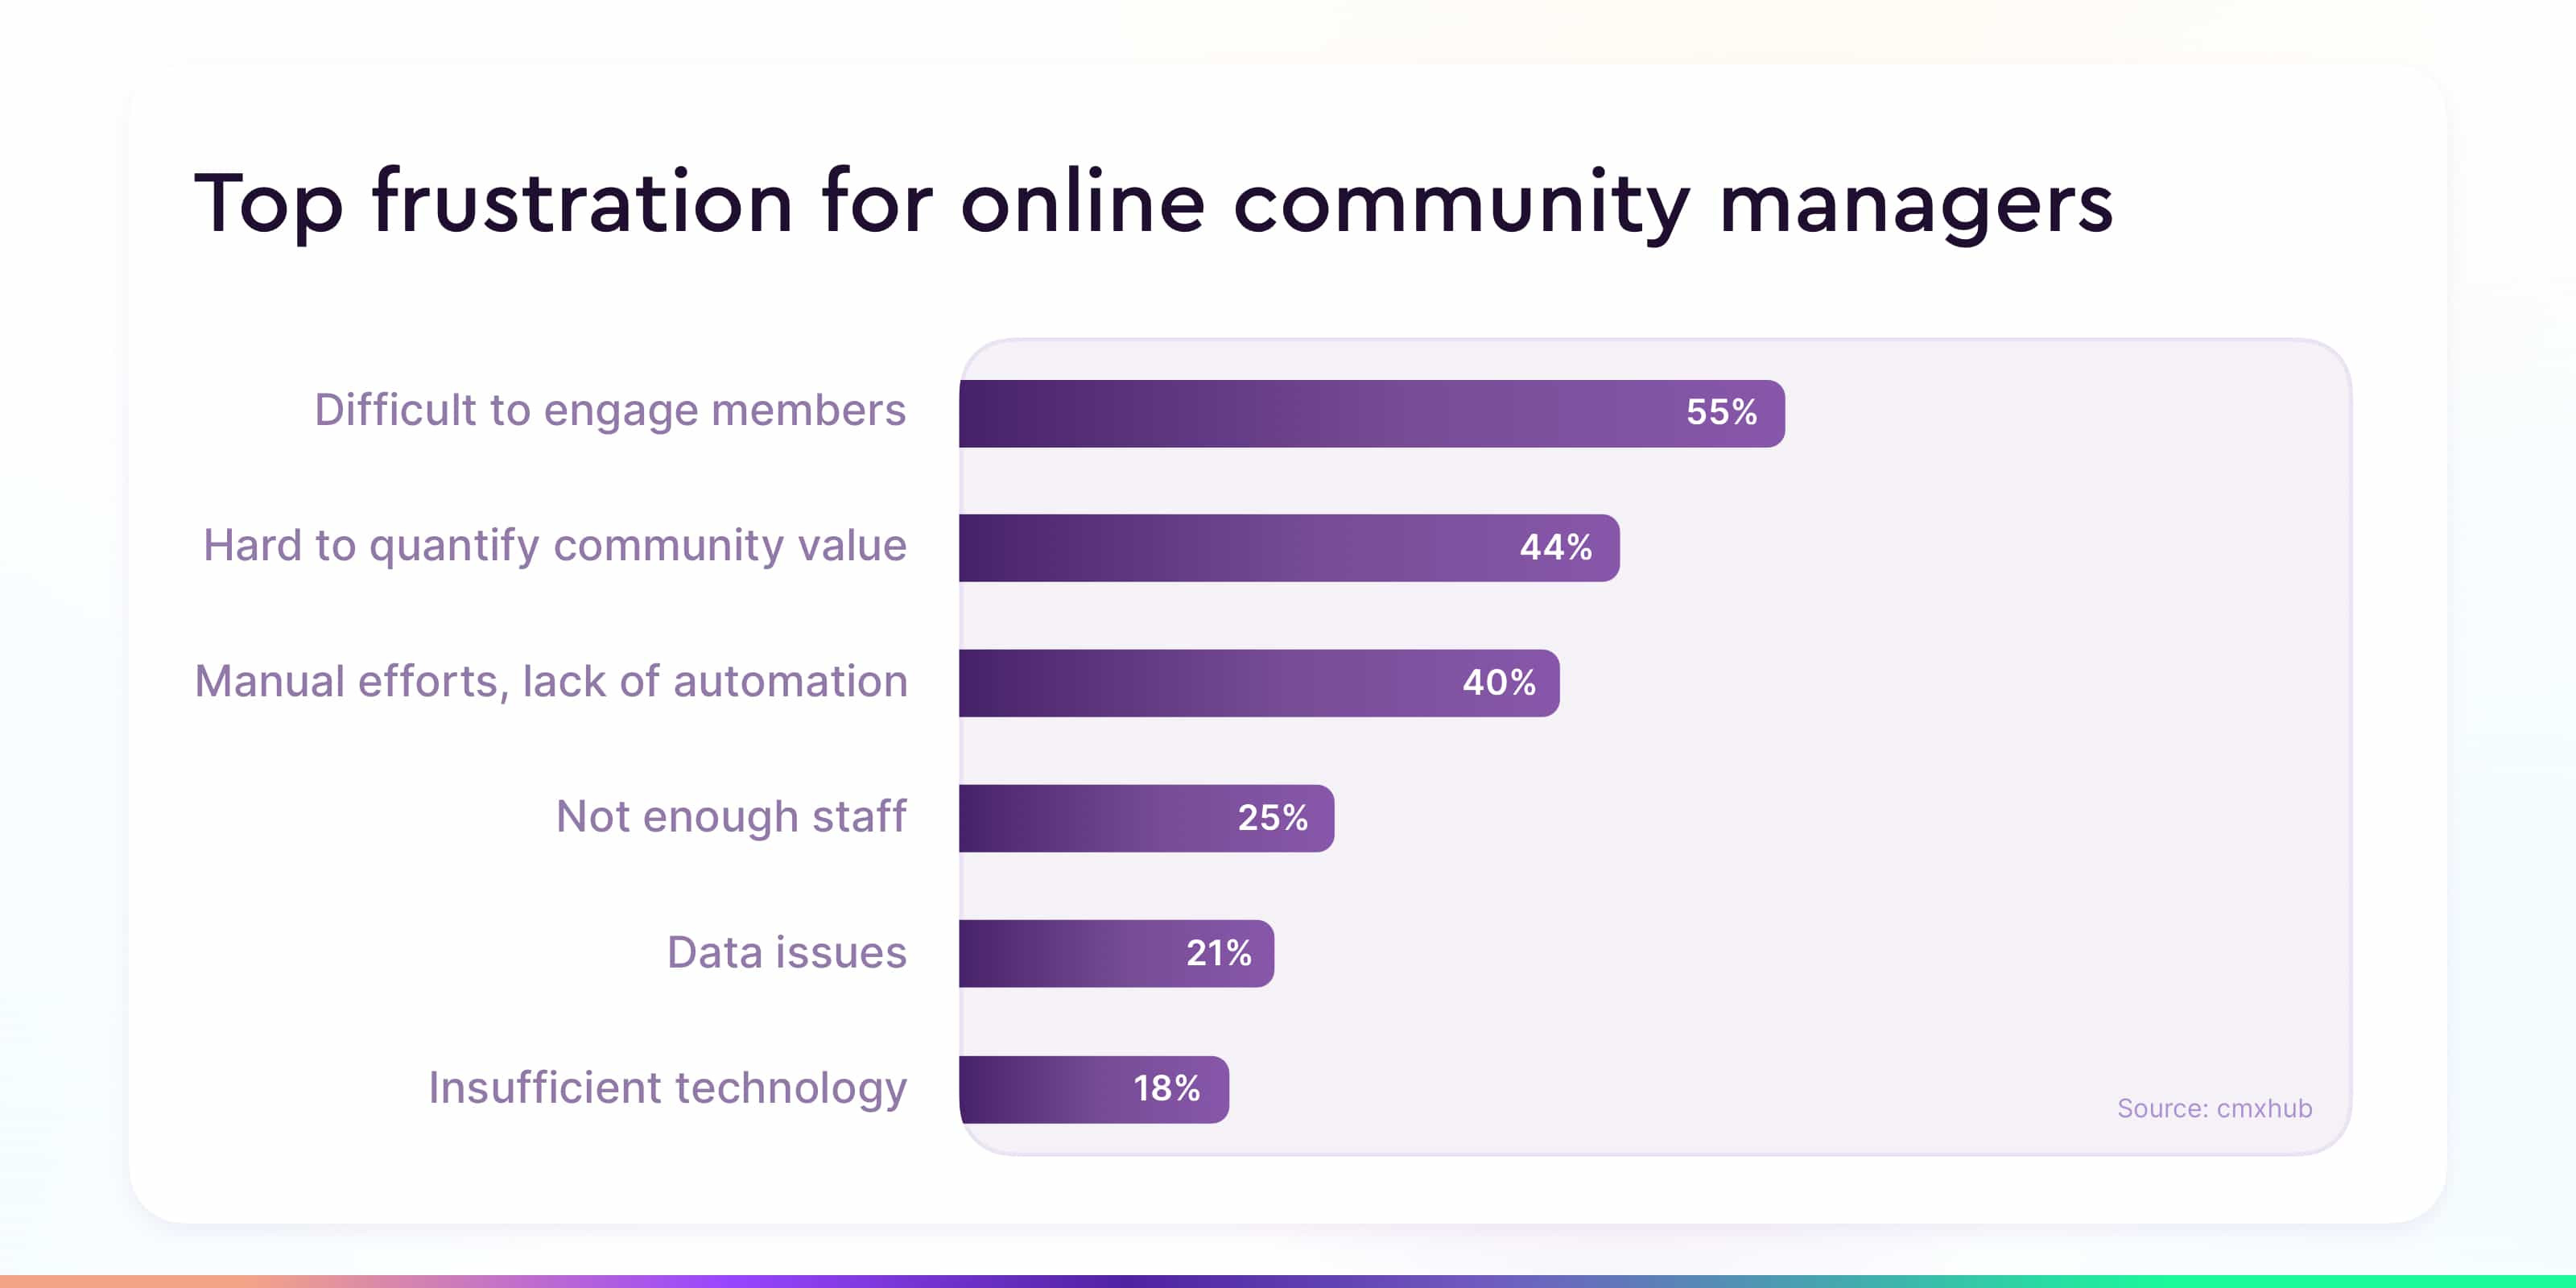 Top frustration for online community managers